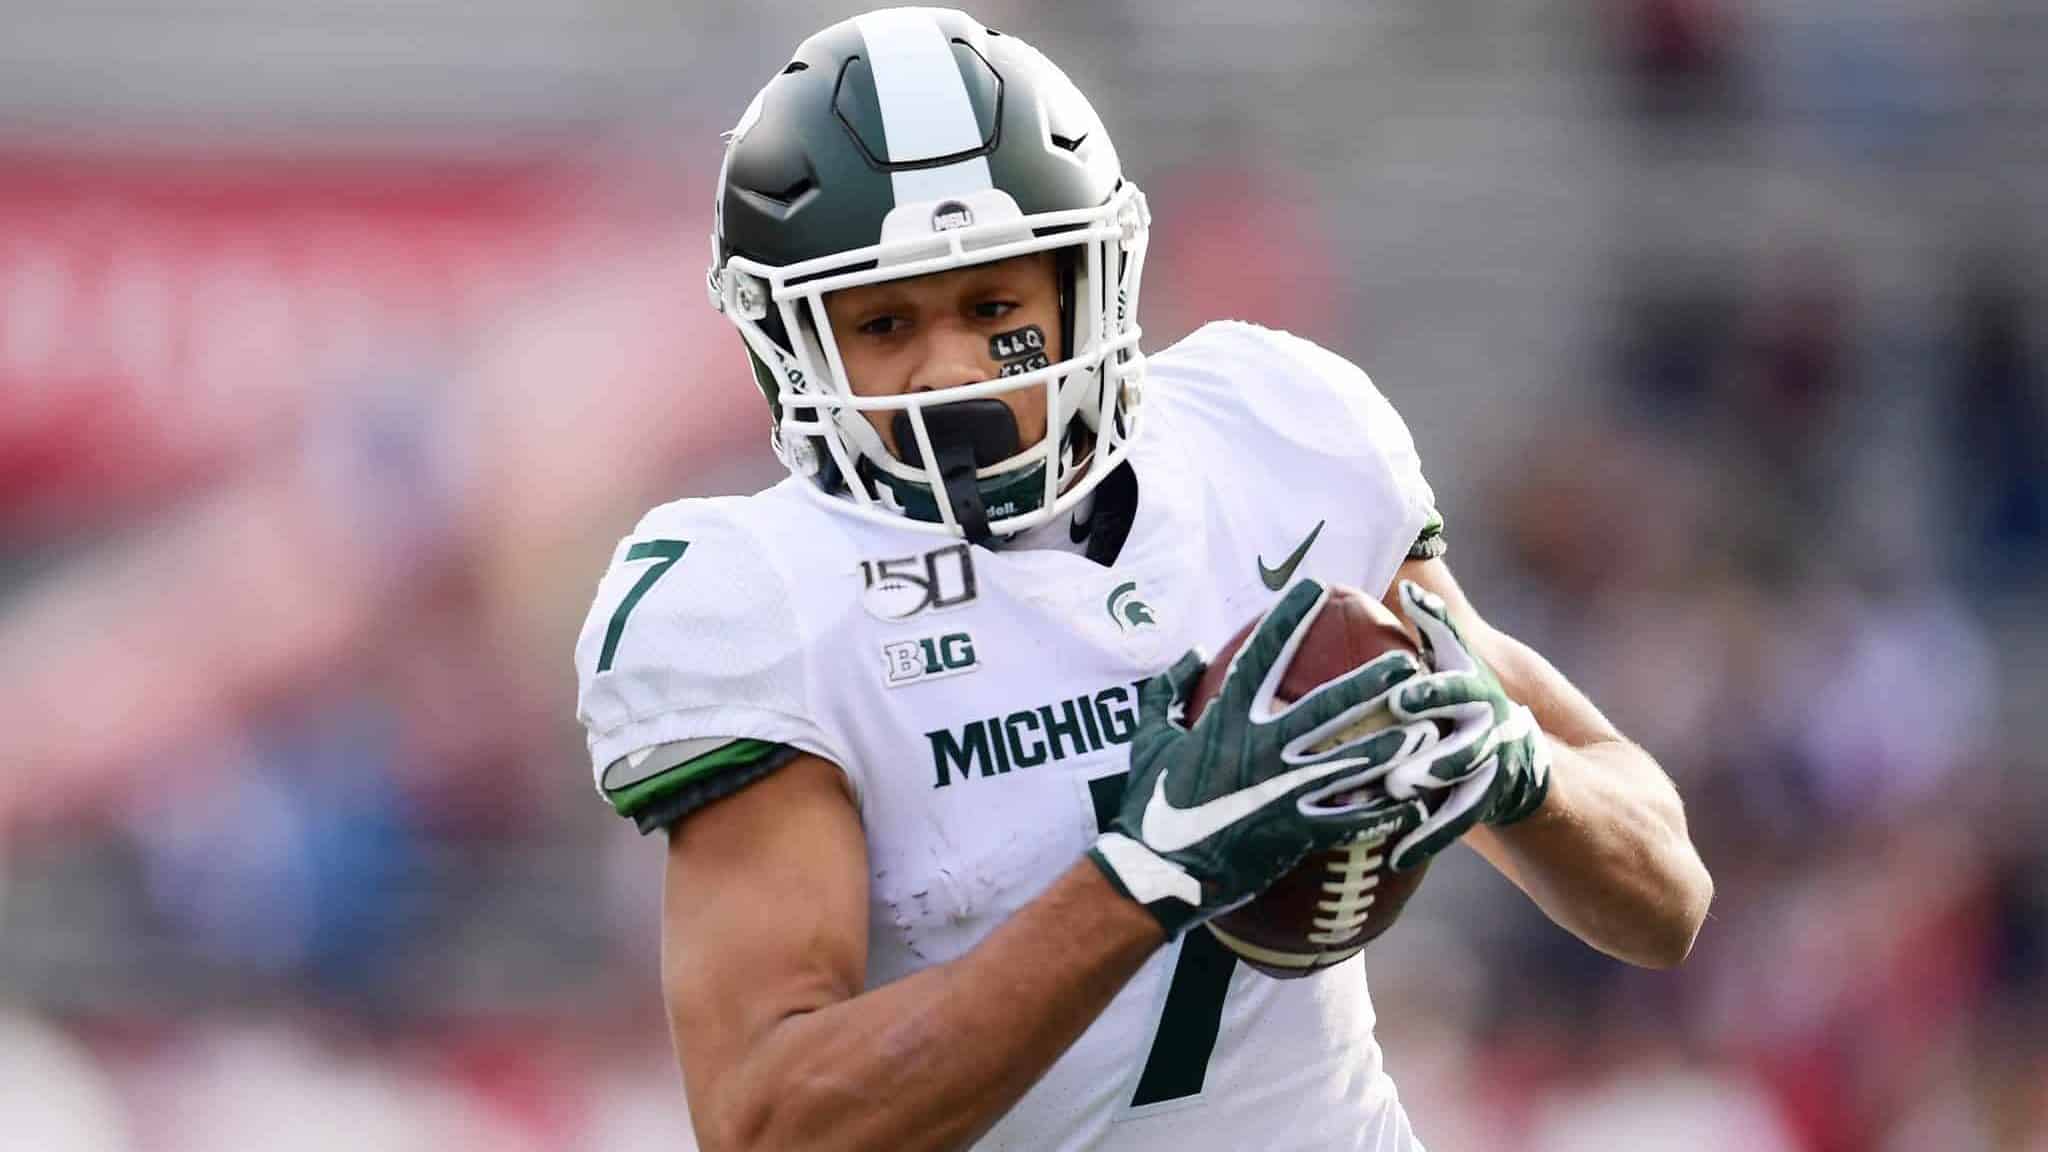 PISCATAWAY, NEW JERSEY - NOVEMBER 23: Cody White #7 of the Michigan State Spartans runs the ball in the second half of their game against the Rutgers Scarlet Knights at SHI Stadium on November 23, 2019 in Piscataway, New Jersey.